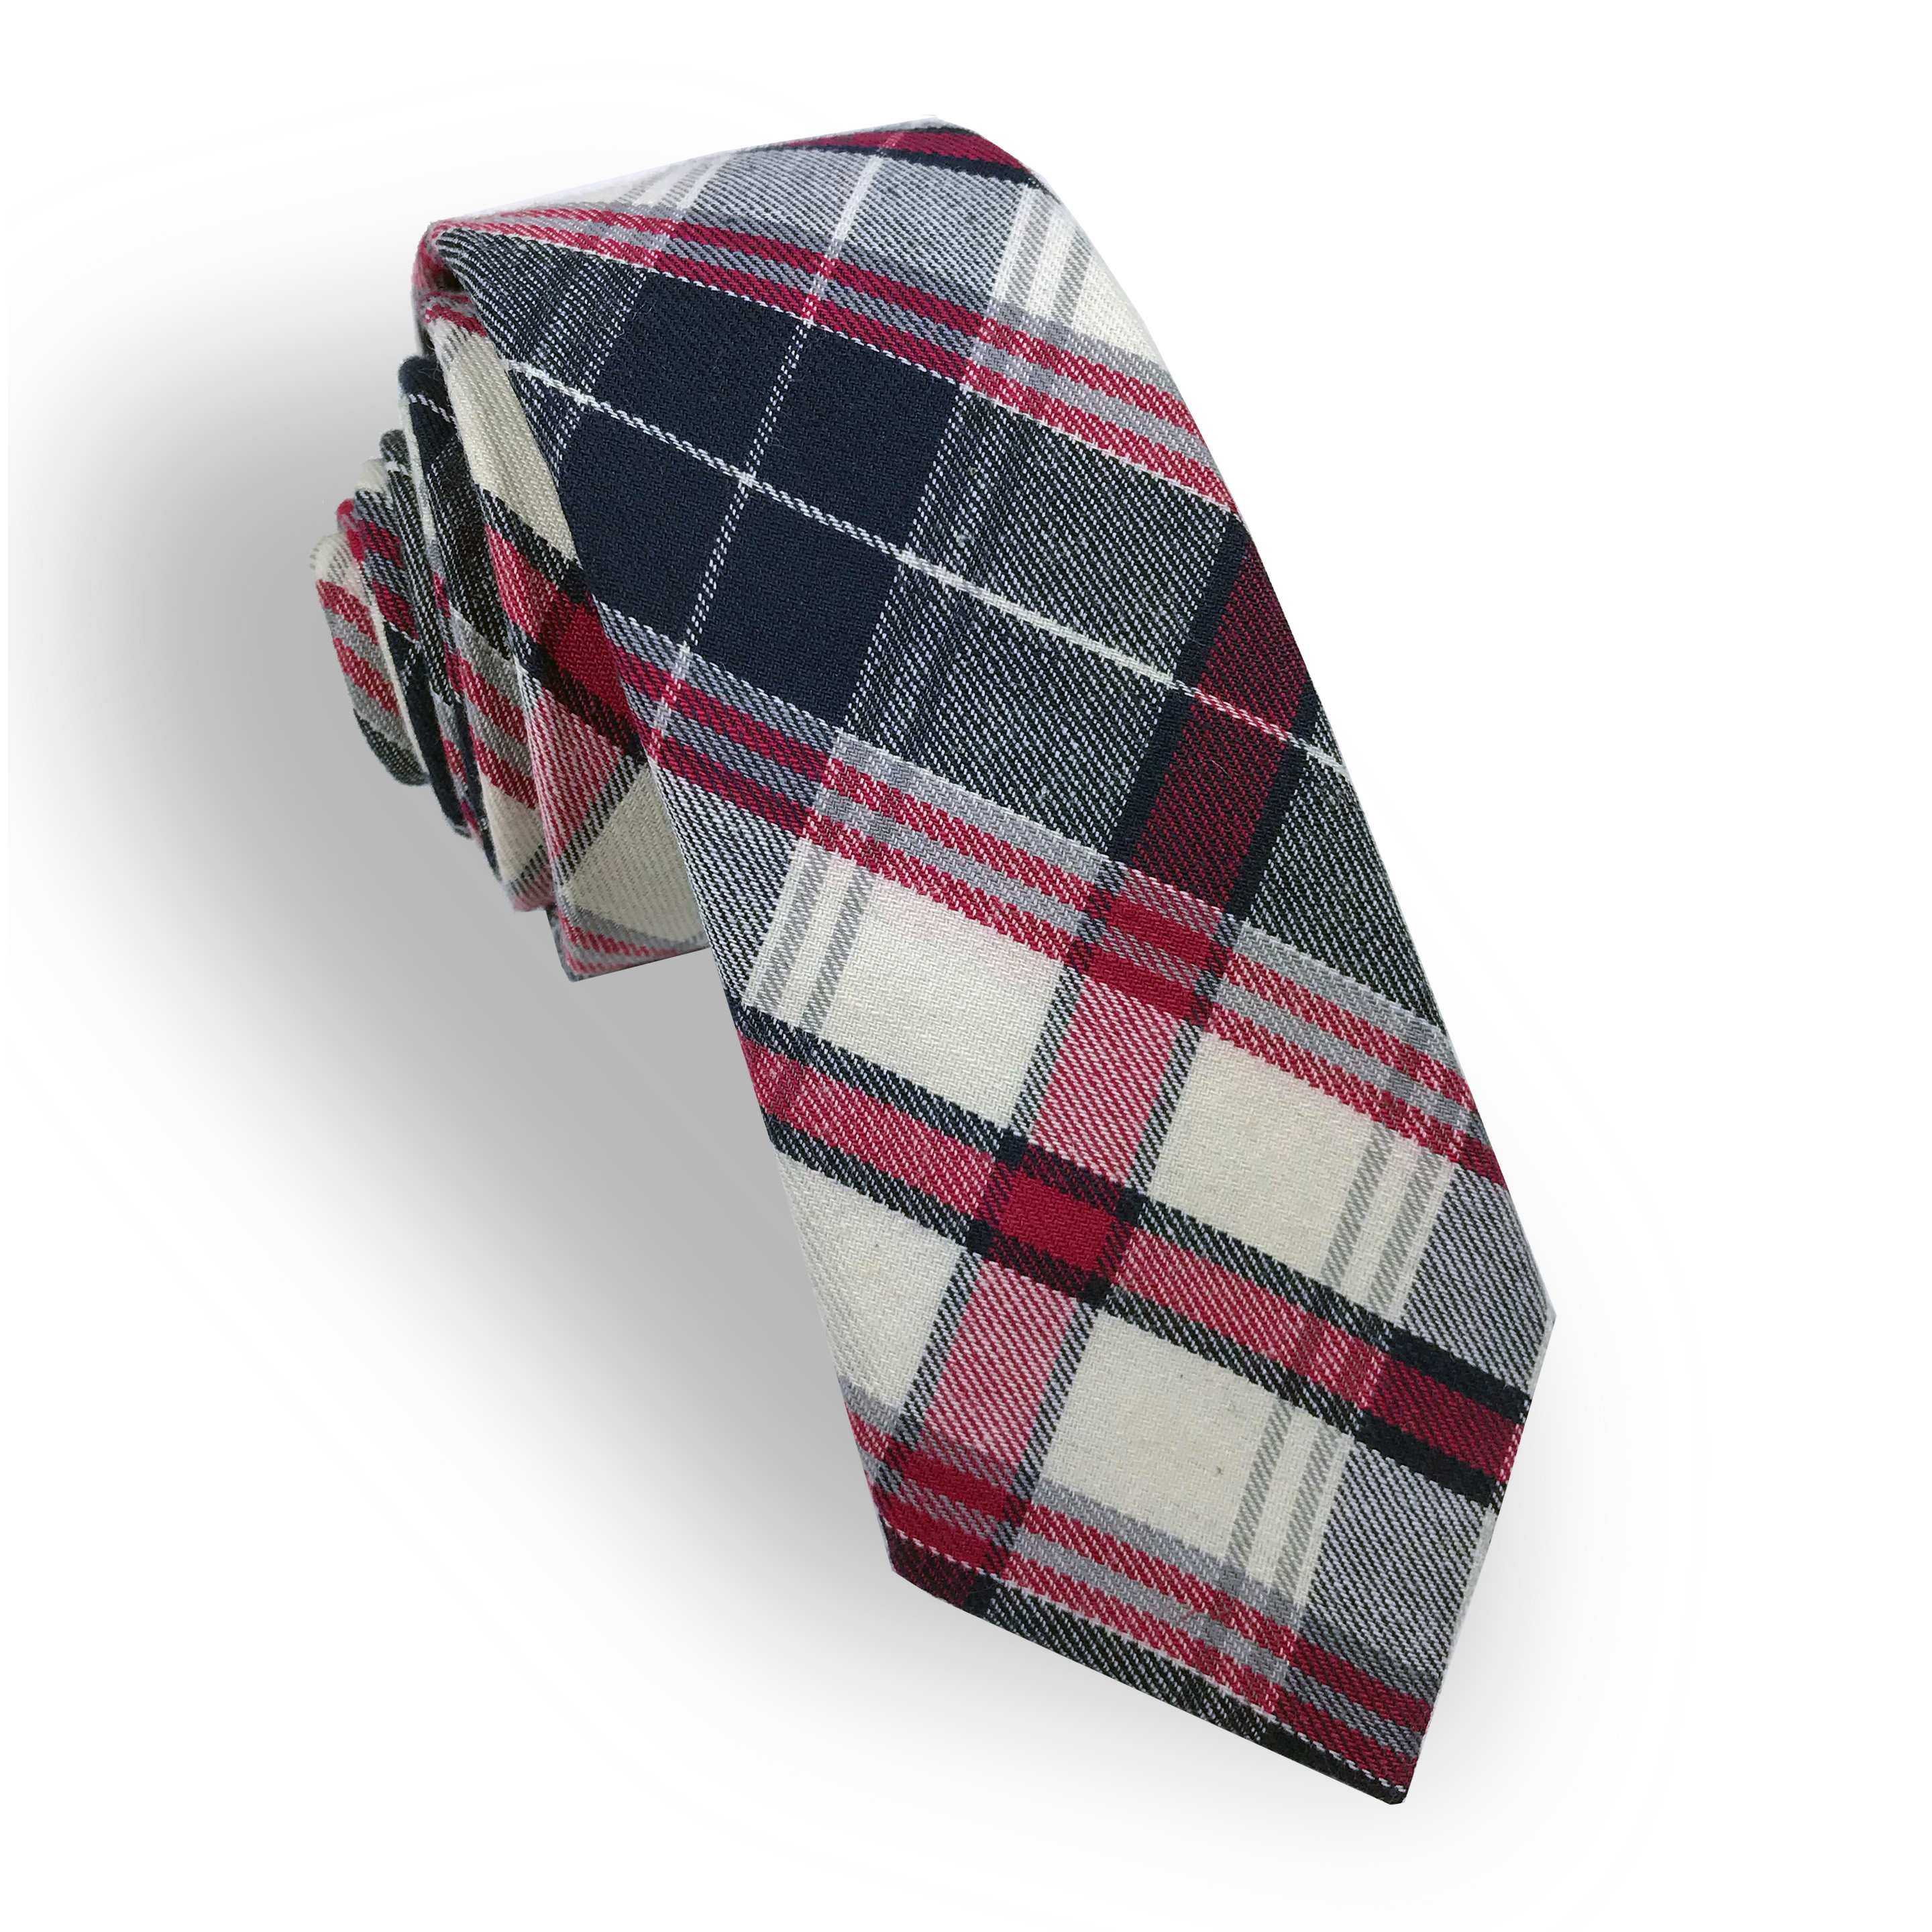 Navy Plaid Tie | Yuppie Socks - Men's Skinny Ties for young professionals